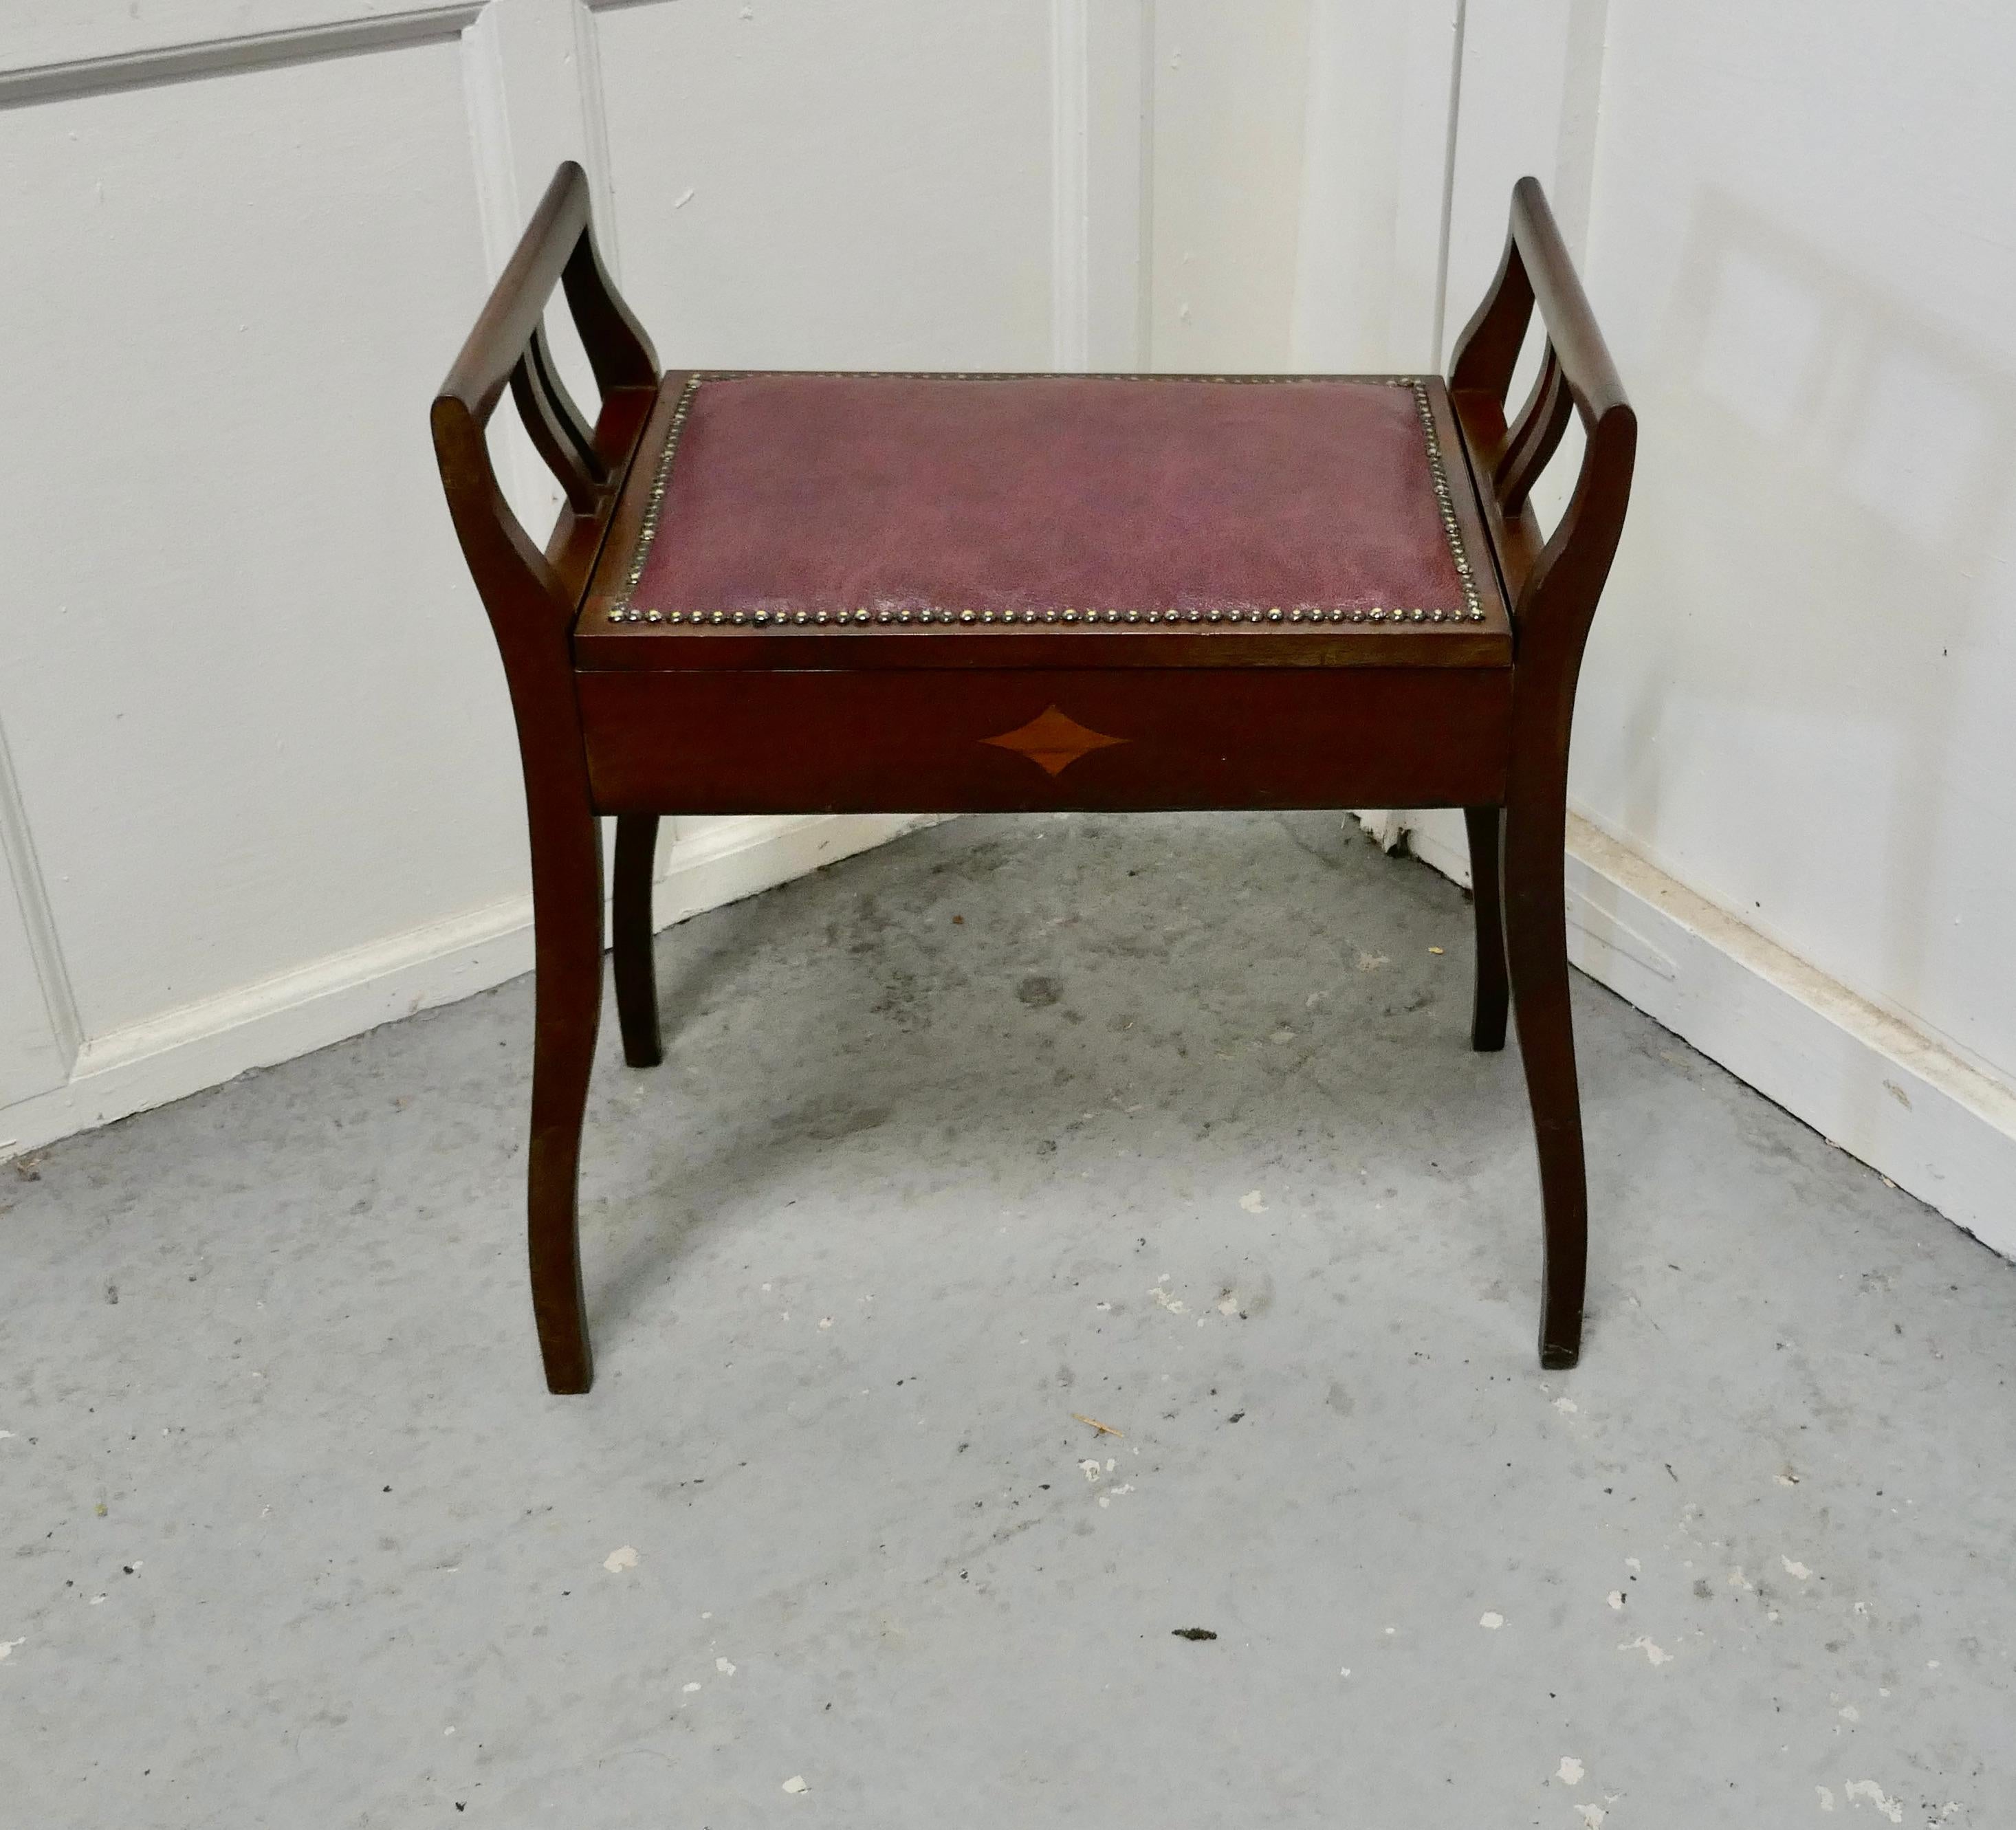 An Edwardian inlaid mahogany piano stool.


This elegant inlaid mahogany piano stool is in very good condition, it has an inlaid decoration, the seat is covered with dark red leather and has a studded border 
The seat opens for the storage of